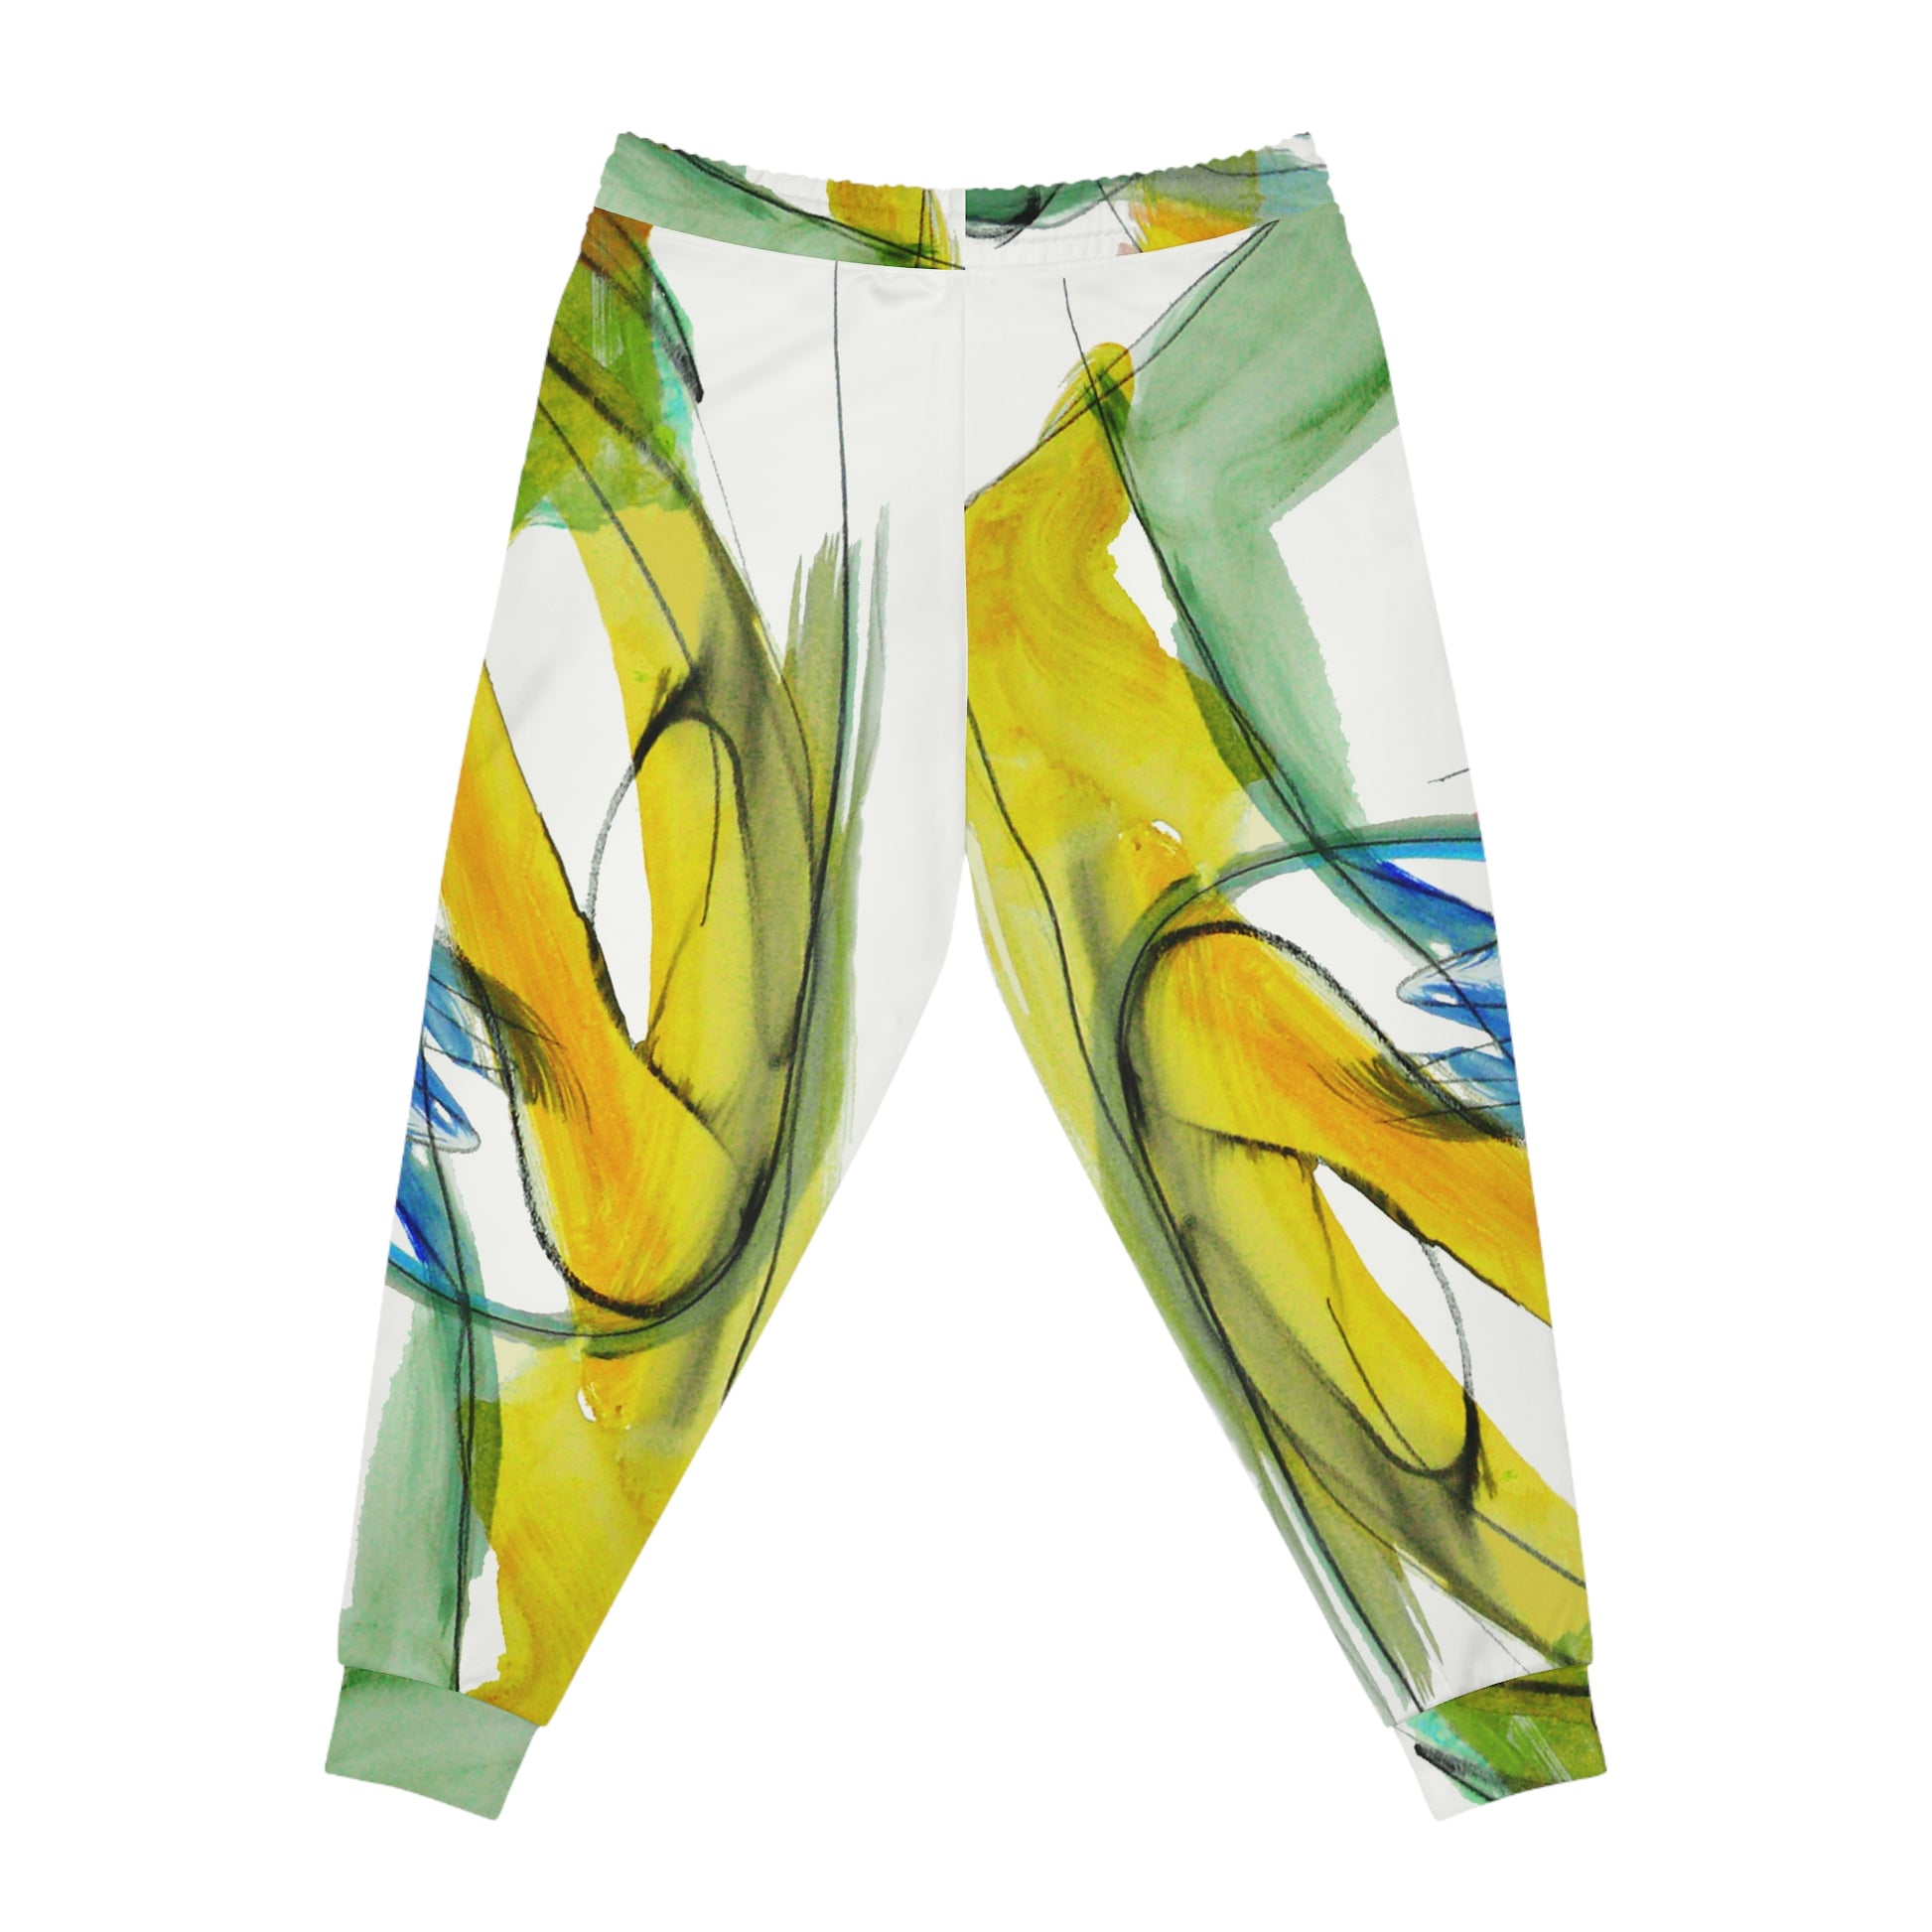 Athletic Joggers For Women | Artsy